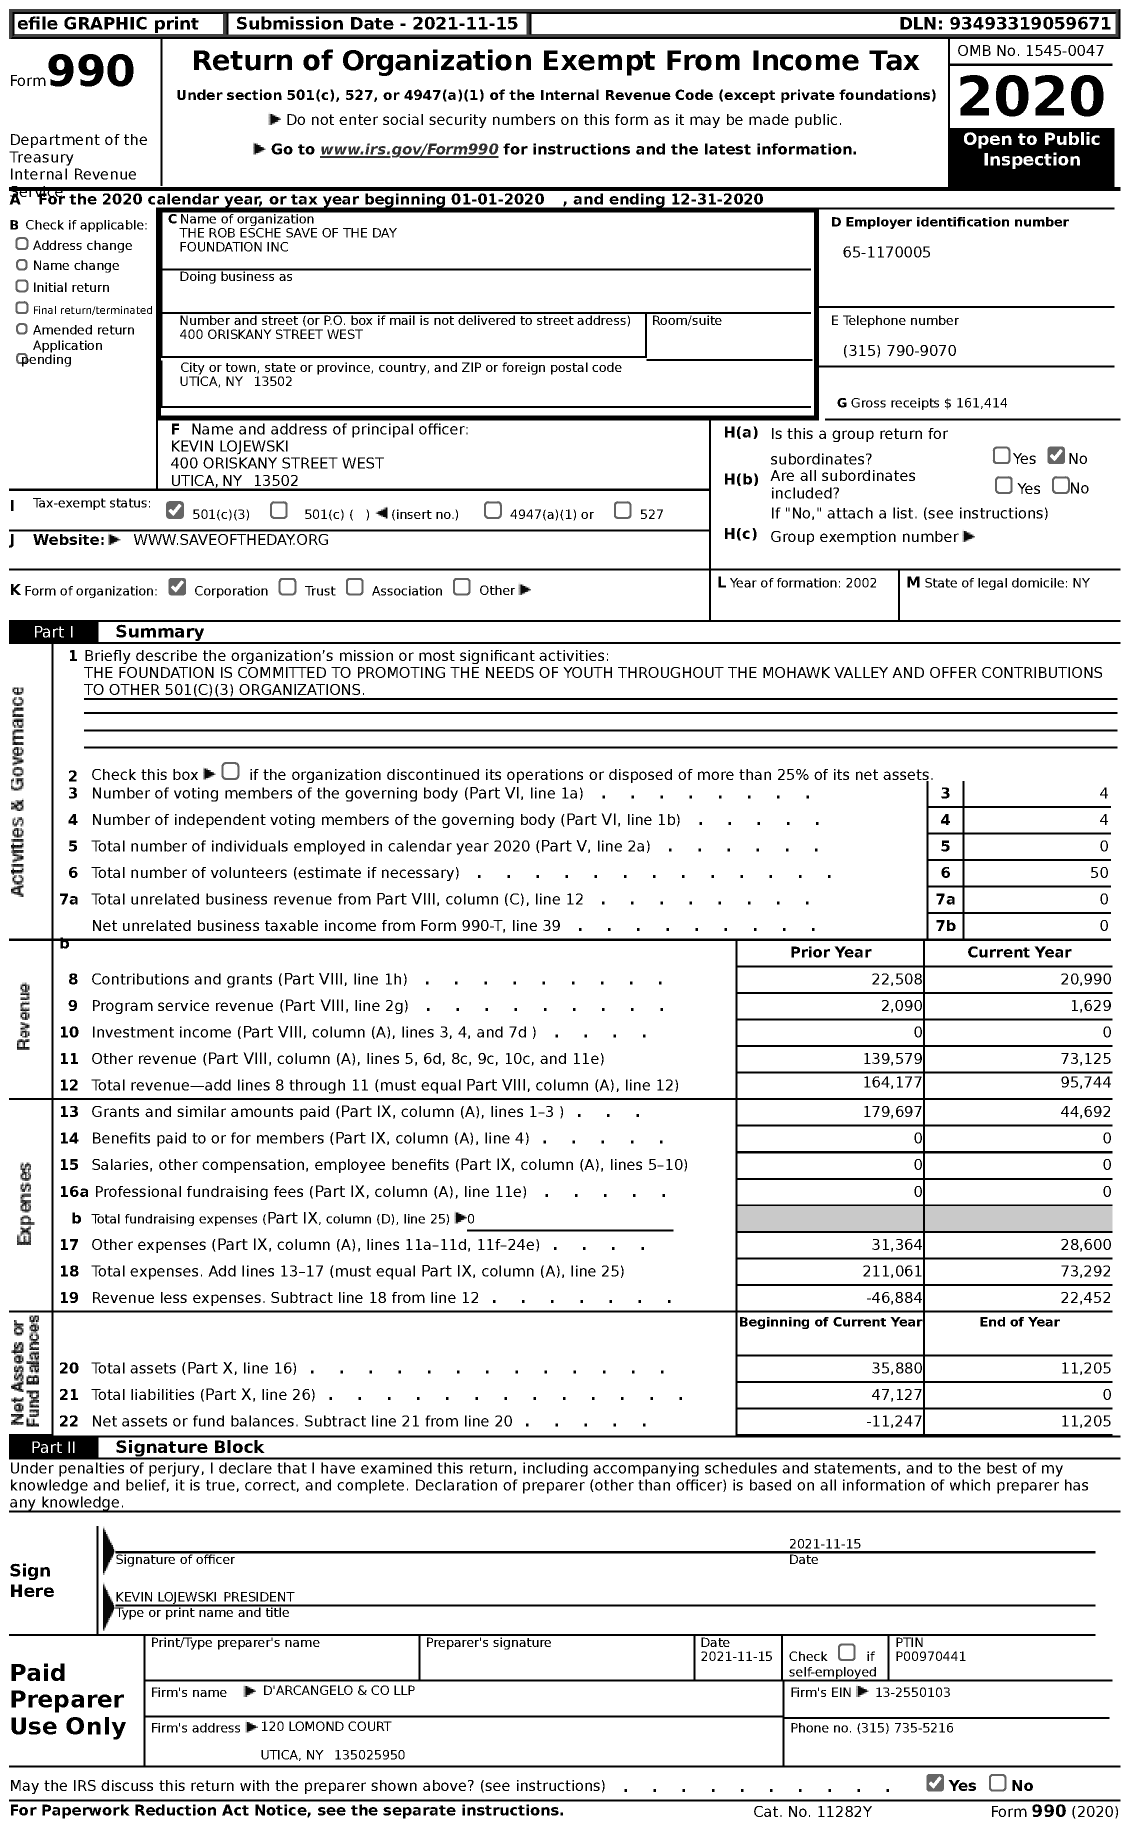 Image of first page of 2020 Form 990 for The Rob Esche Save of the Day Foundation